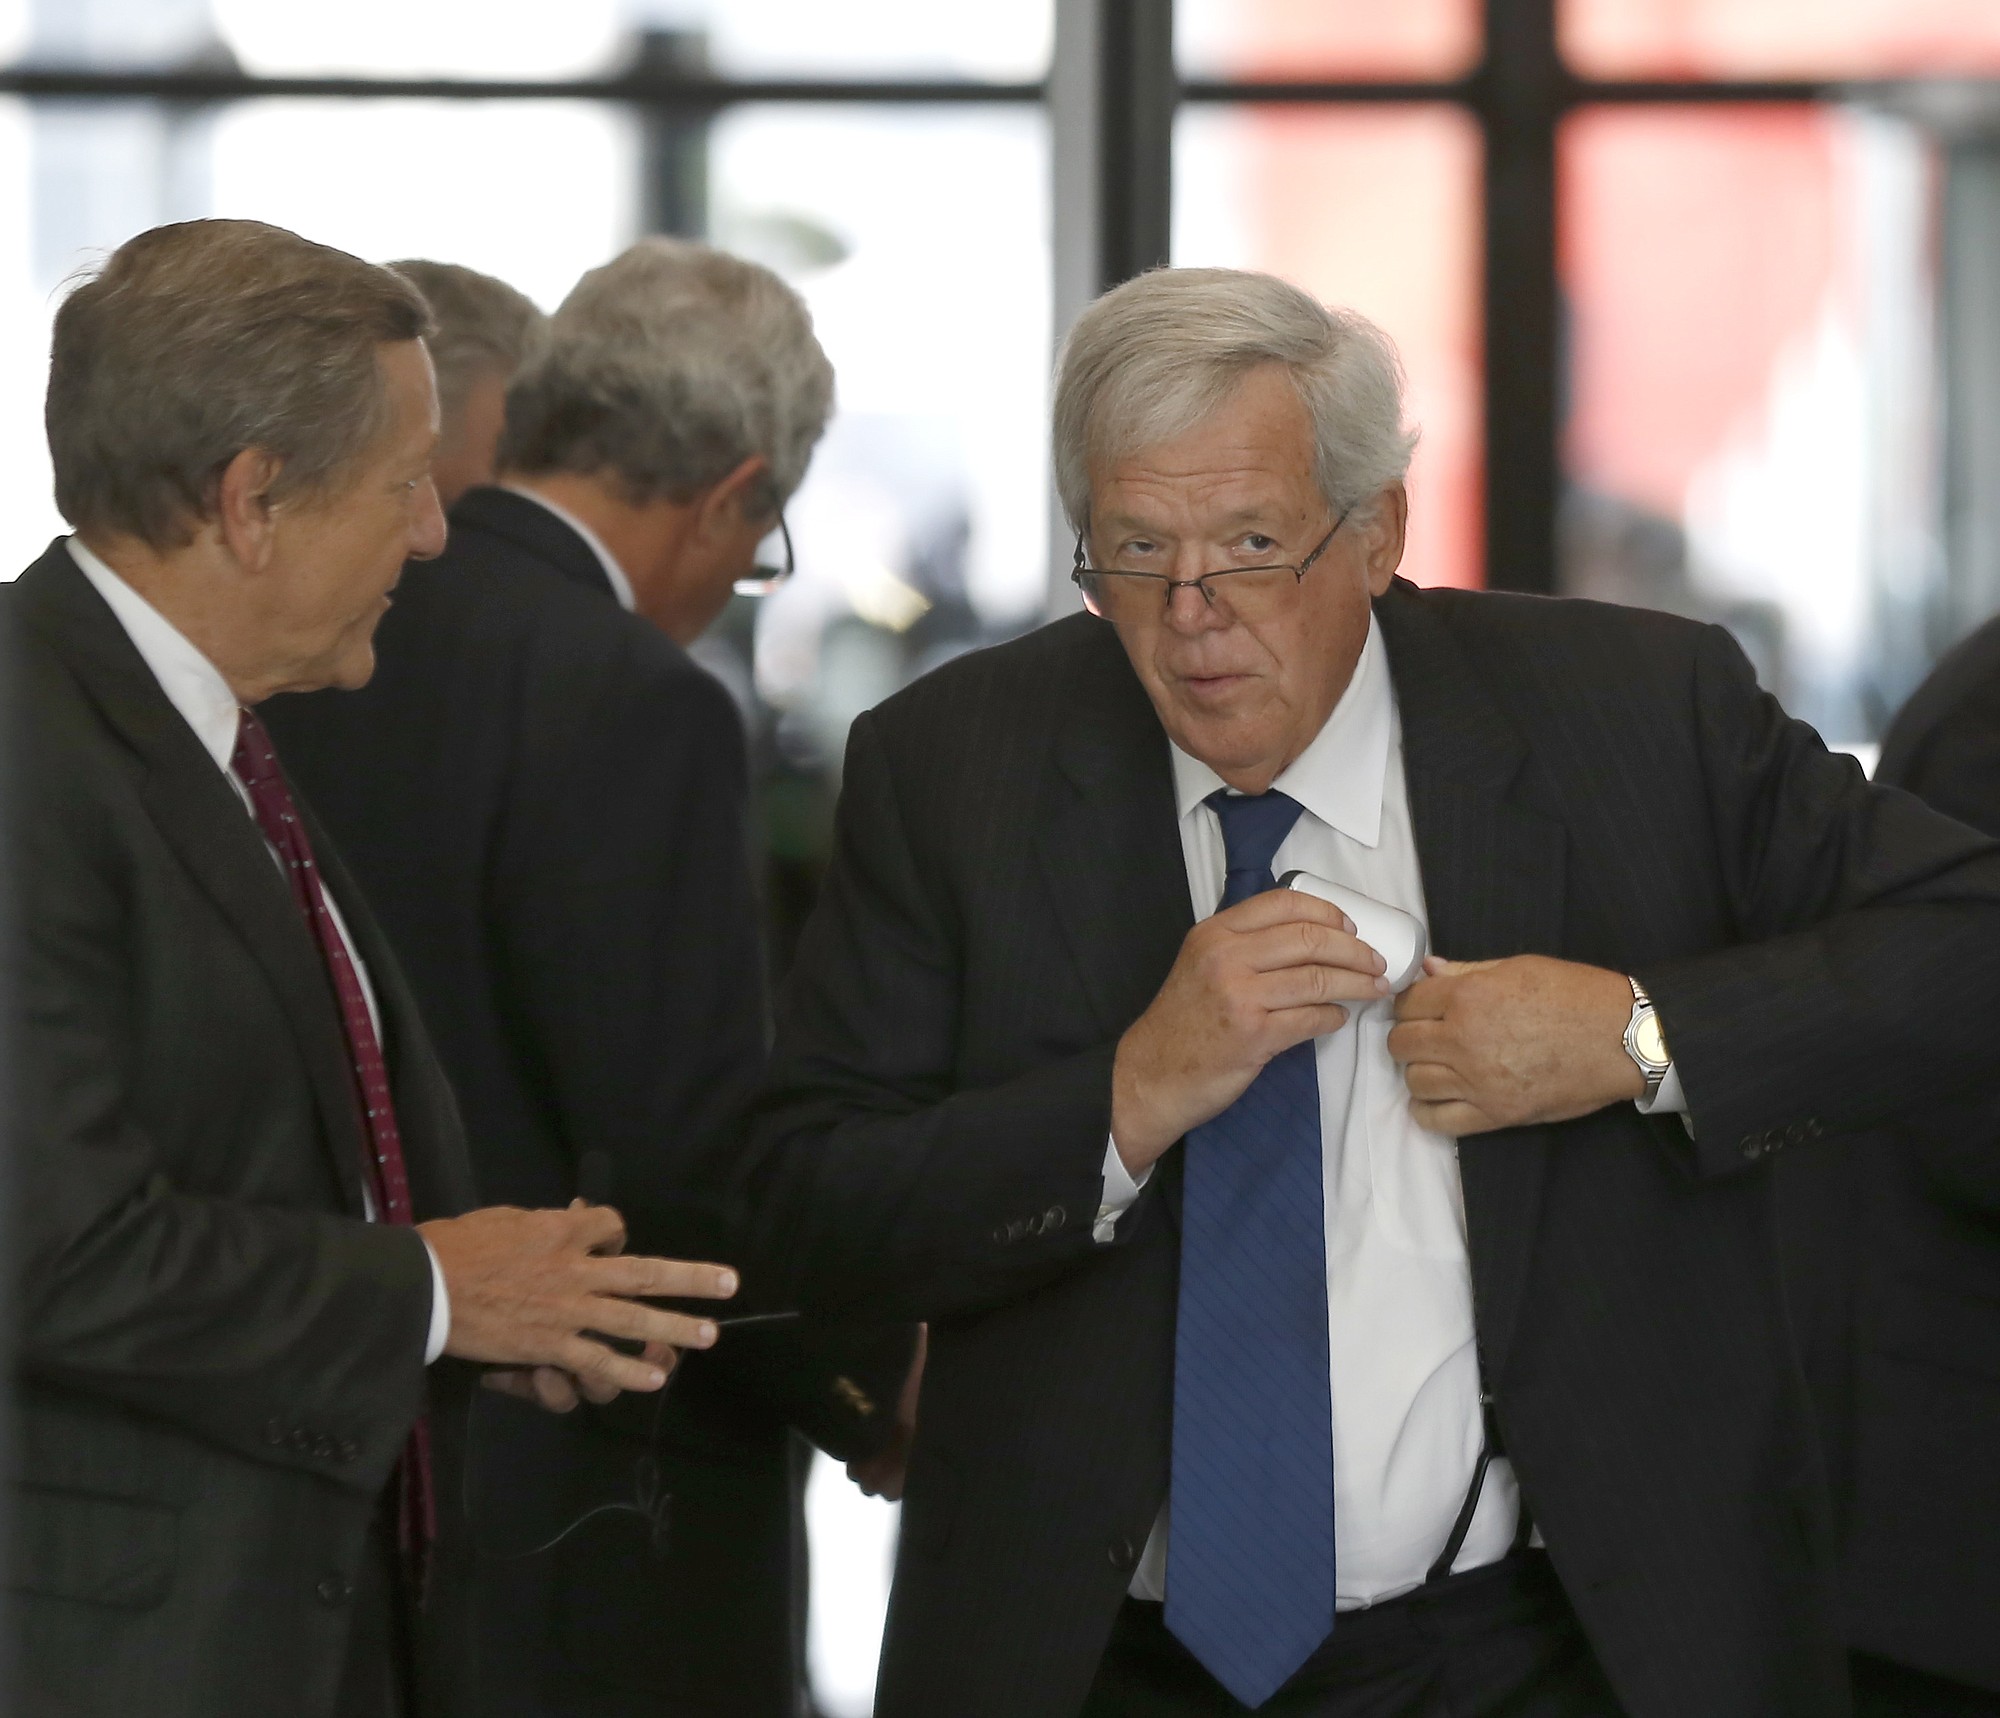 Former House Speaker Dennis Hastert, right, arrives at the federal courthouse Tuesday  in Chicago for his arraignment on federal charges that he broke federal banking laws and lied about the money when questioned by the FBI.